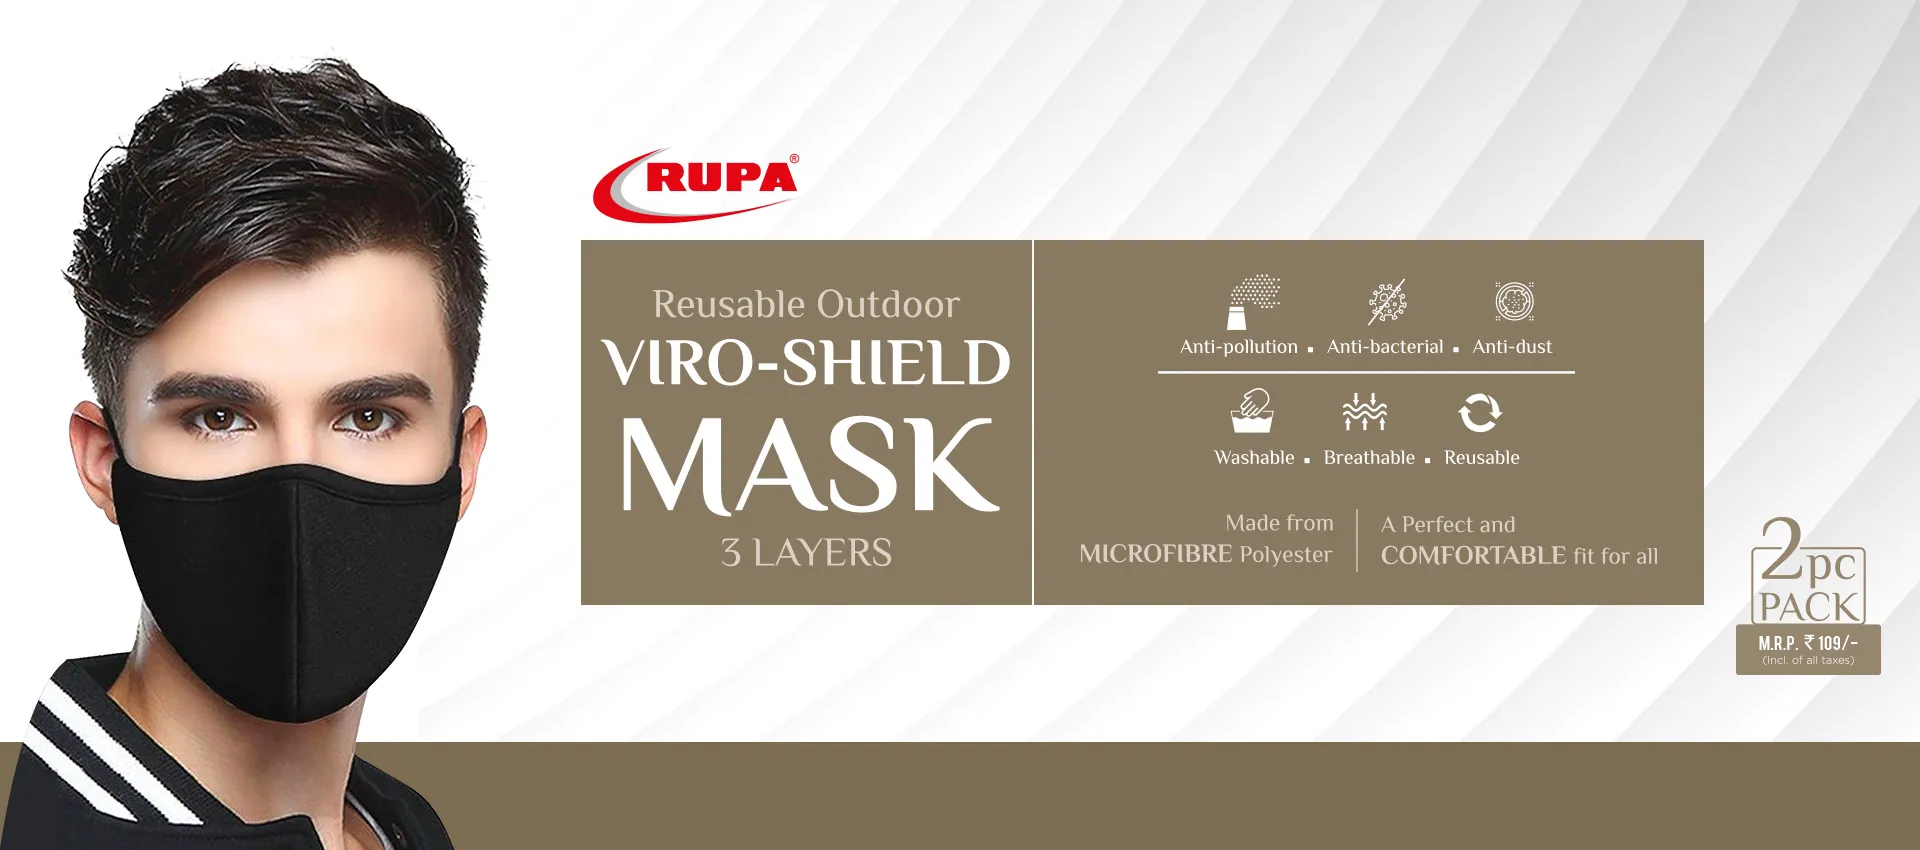 Rupa Knitwear - #RUPA50Years Get a FREE Face Towel with